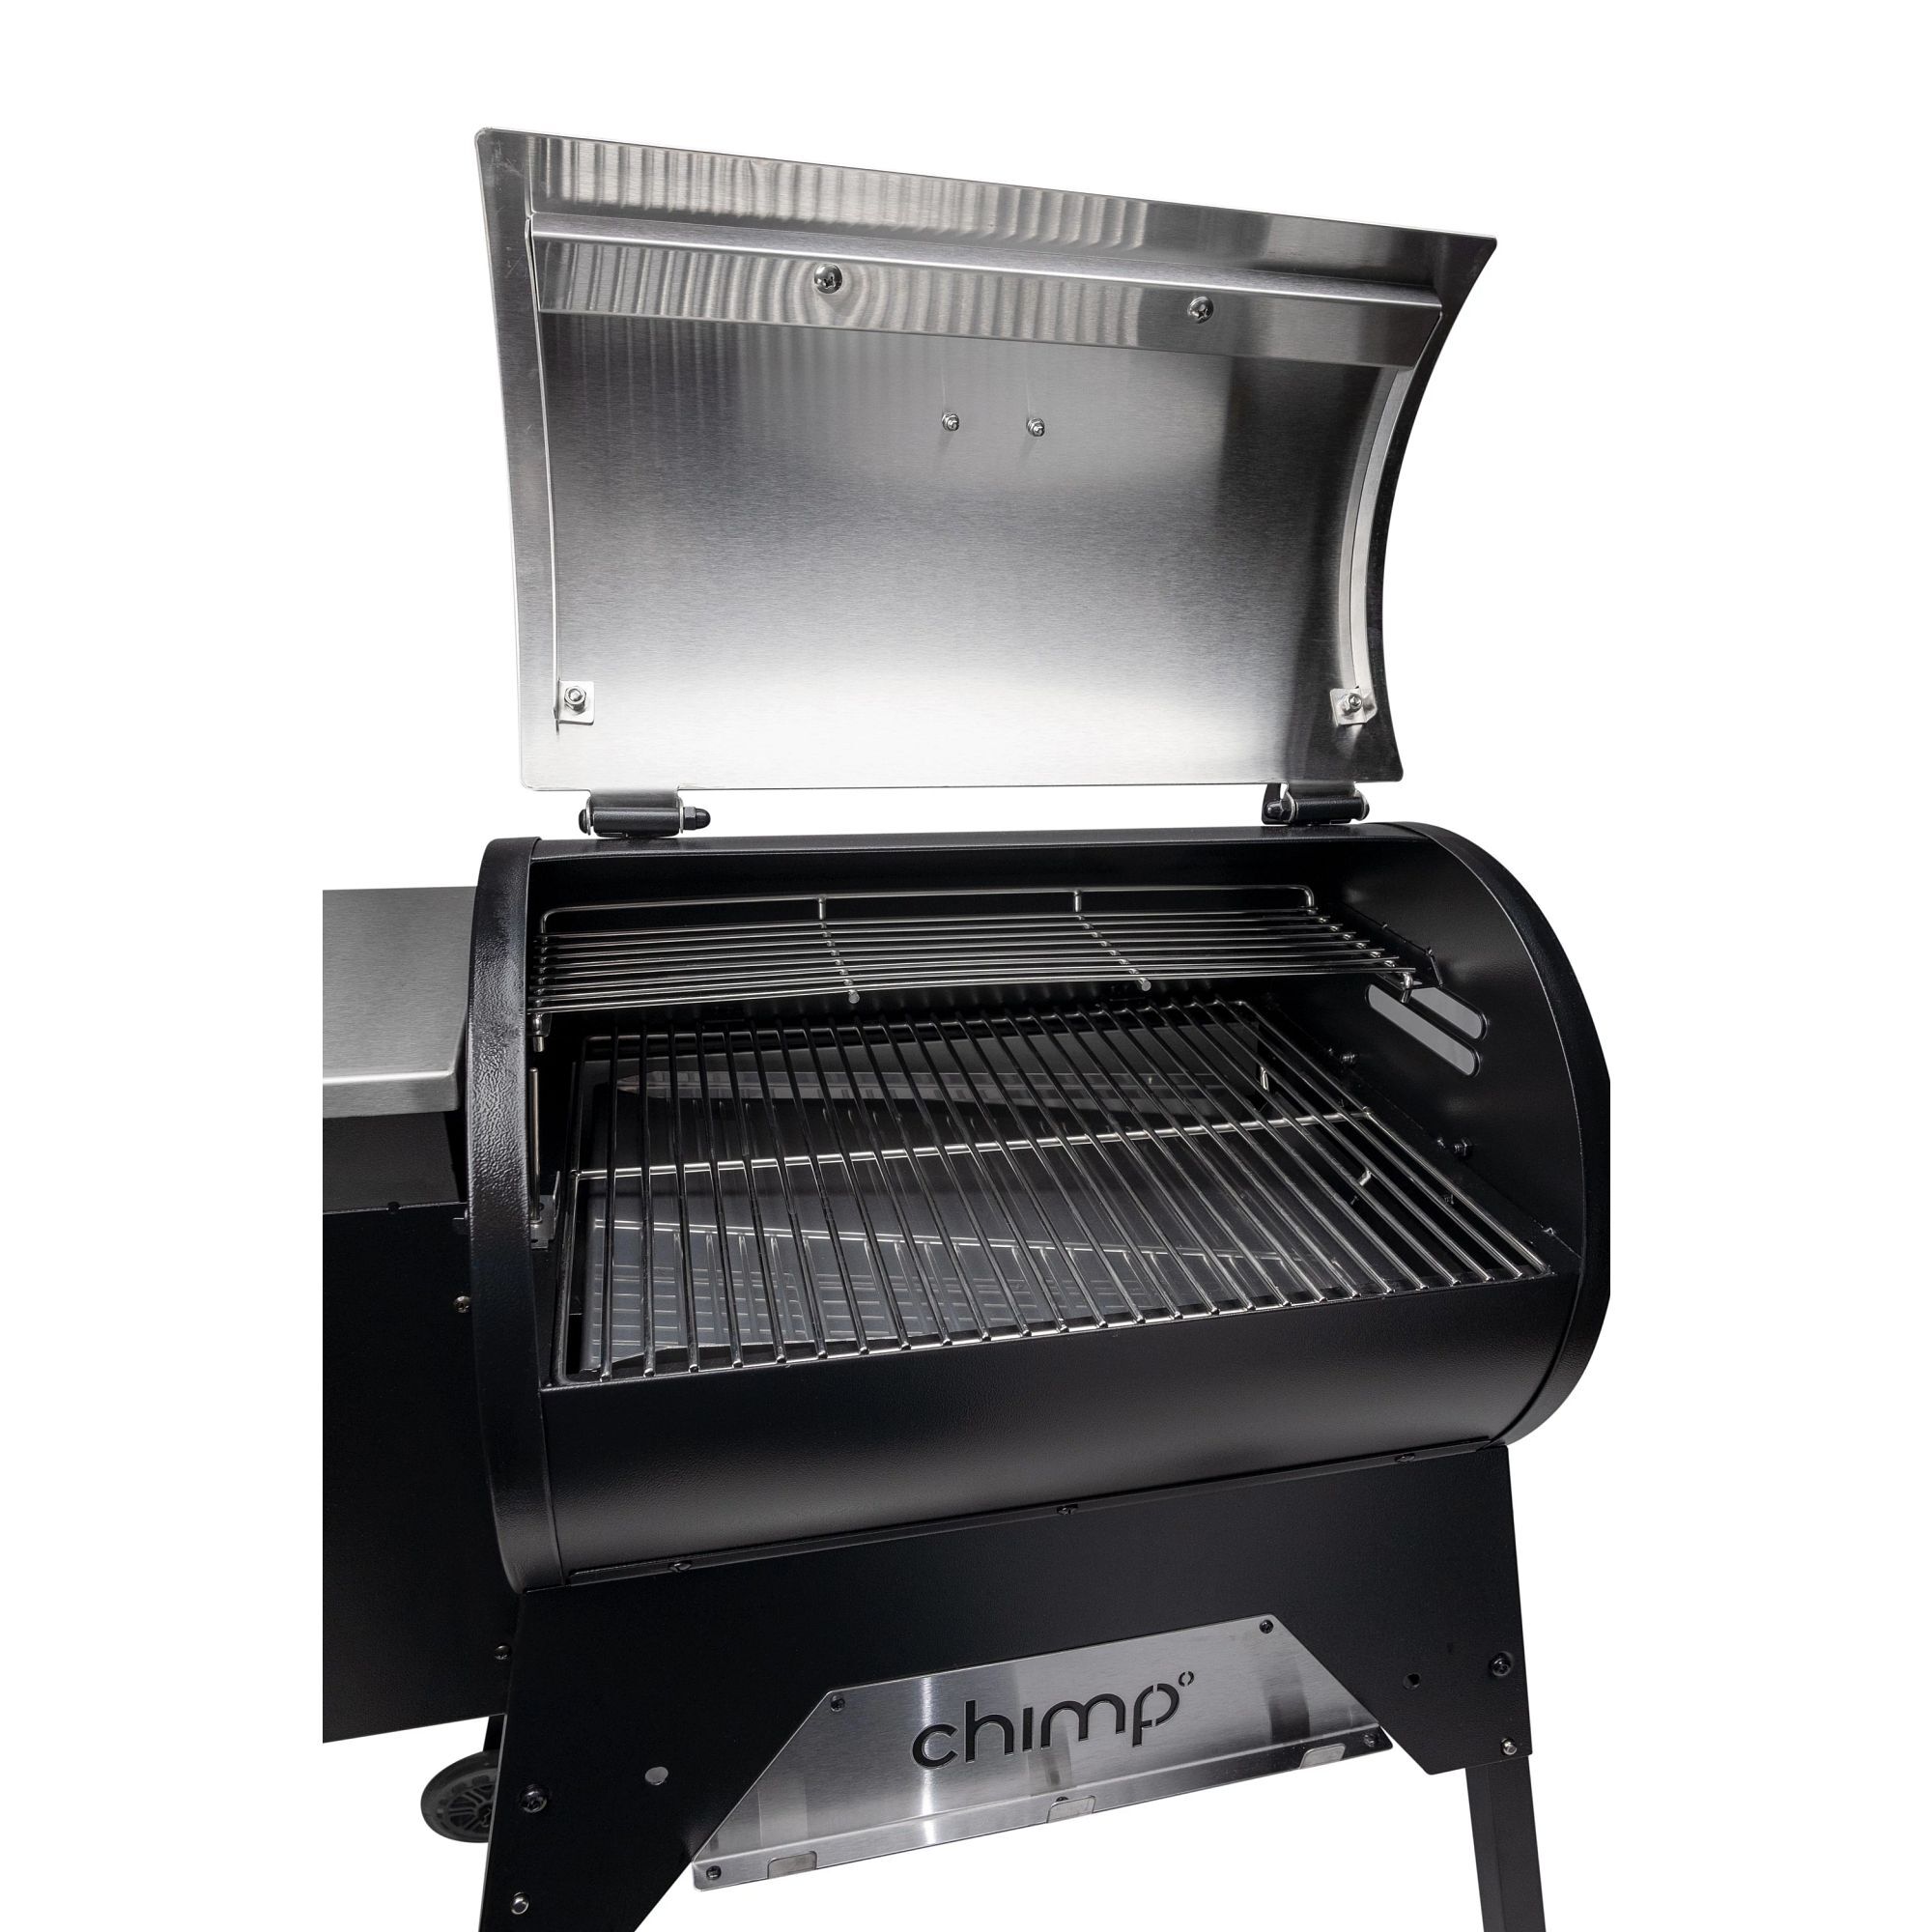 recteq Road Warrior 340 Portable Pellet Grill | Electric Pellet Smoker  Grill, BBQ Grill, Outdoor Grill - Wood Pellets - Grill, Sear, Smoke, and  More!